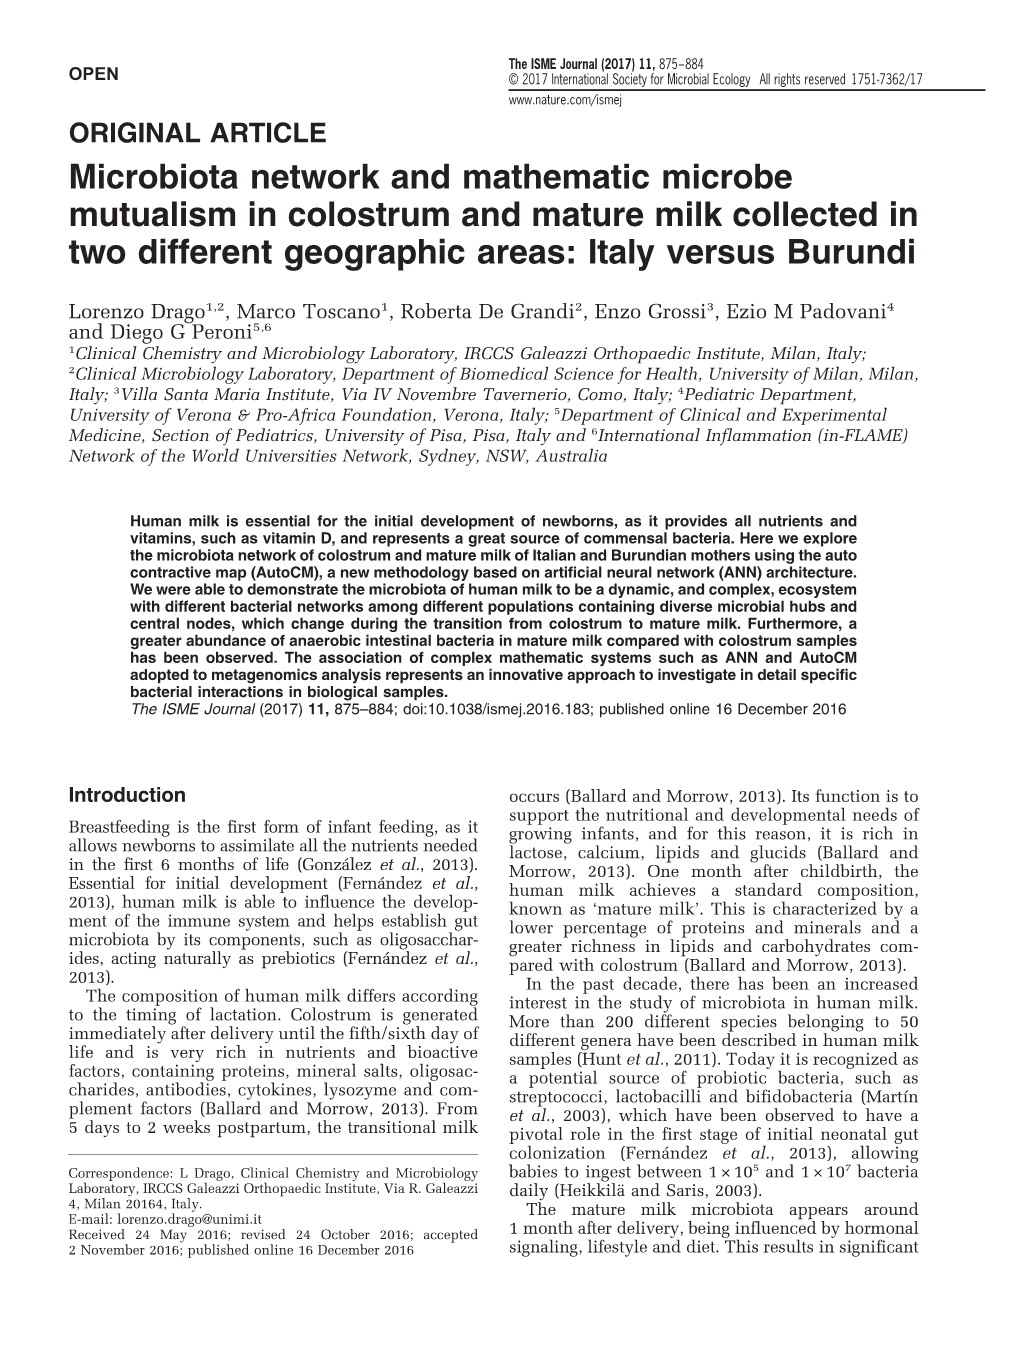 Microbiota Network and Mathematic Microbe Mutualism in Colostrum and Mature Milk Collected in Two Different Geographic Areas: Italy Versus Burundi